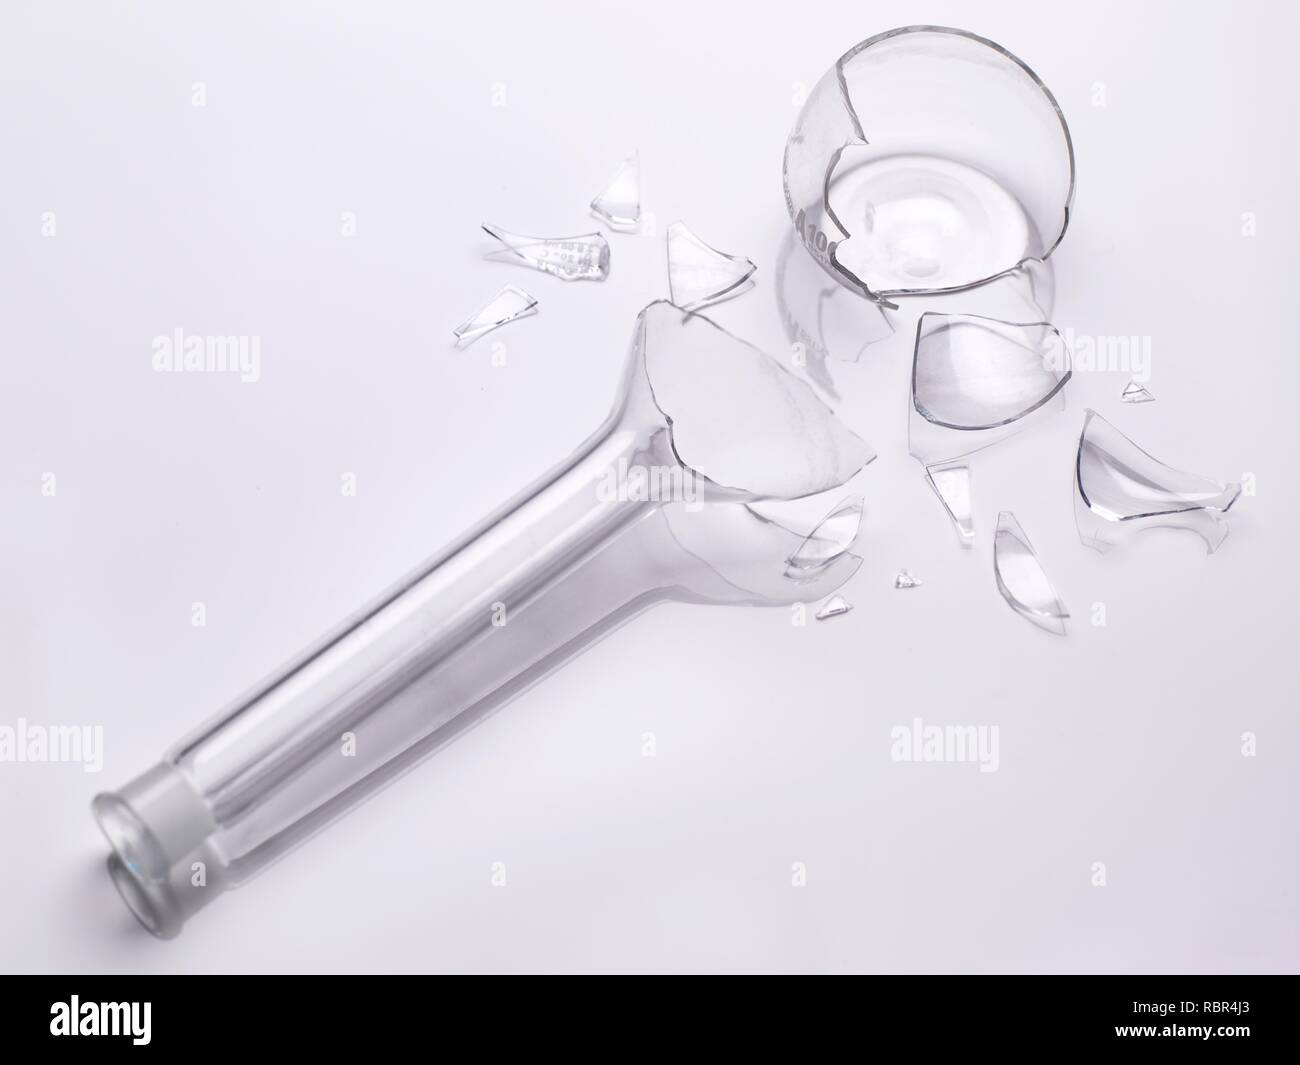 Accident during an experiment. Broken laboratory glassware flask. Stock Photo